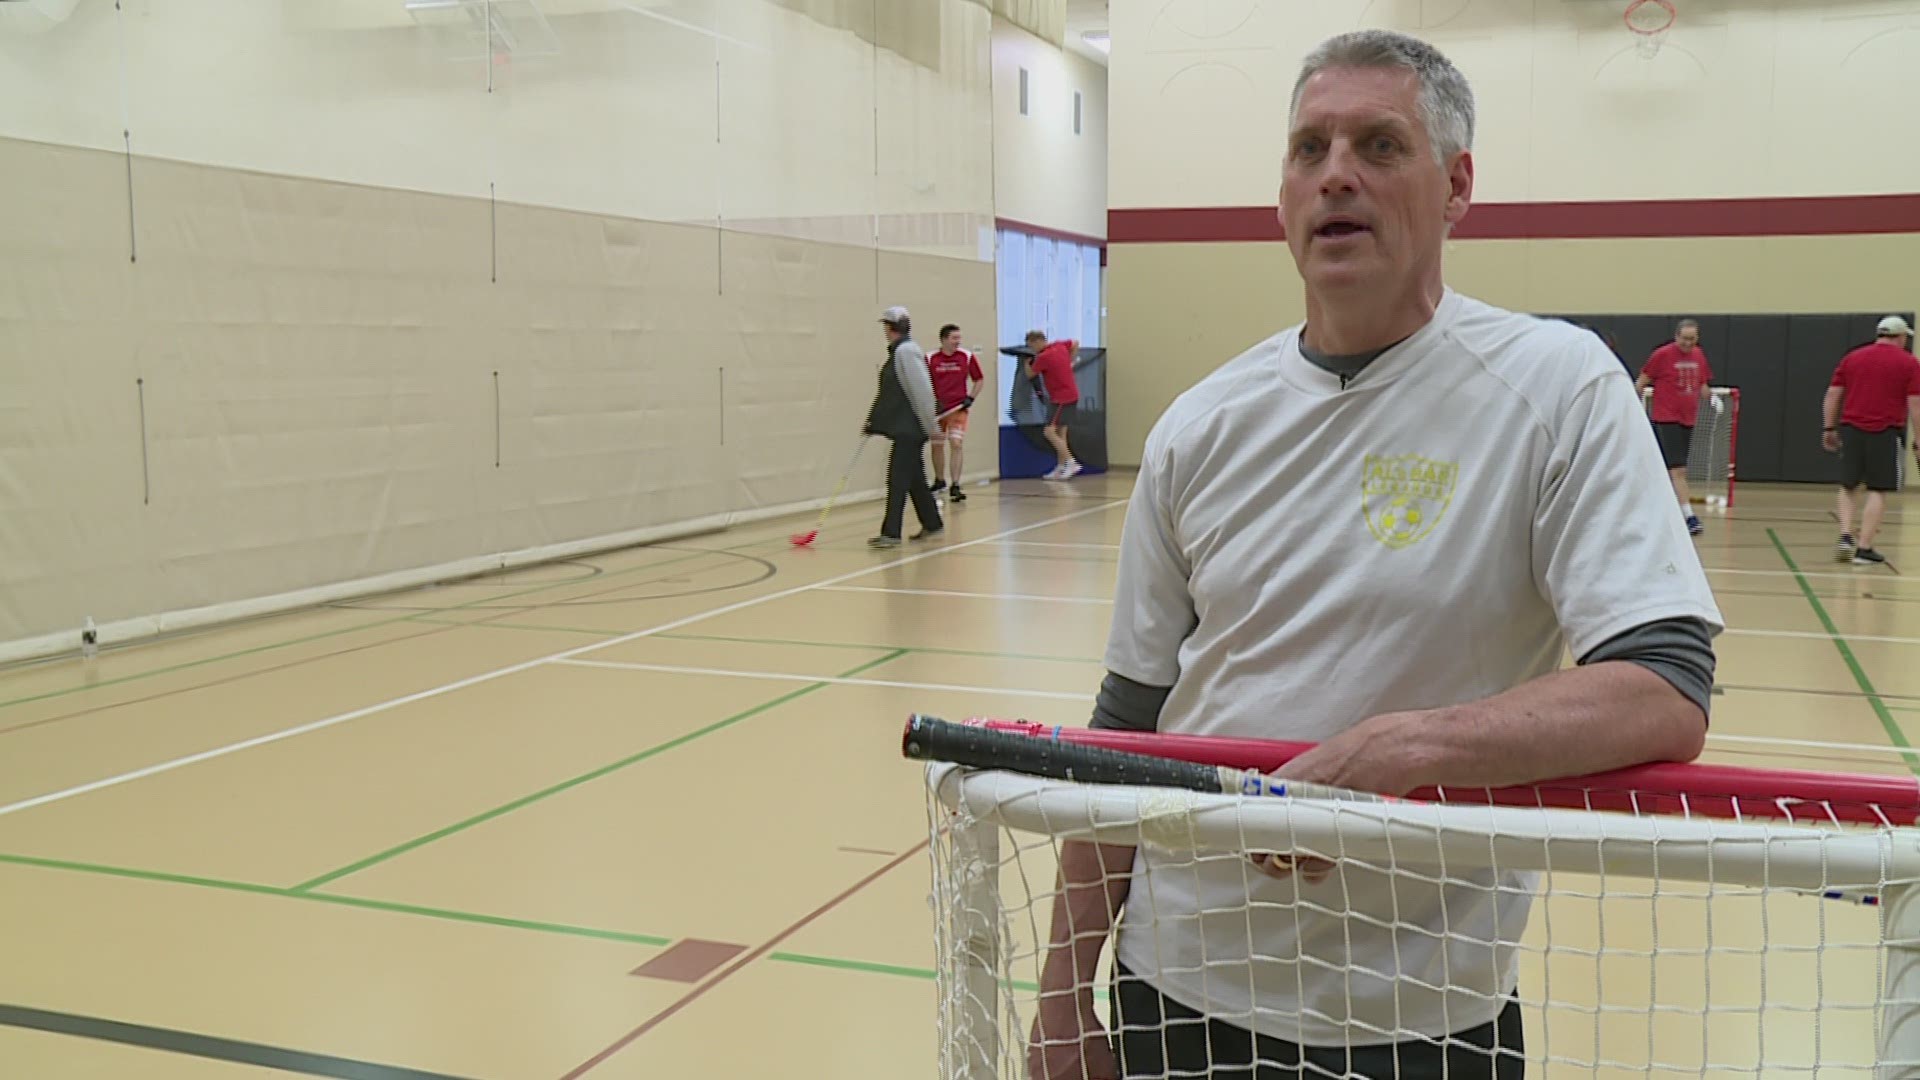 Perk puts his skills to the test against a group that's been playing floor hockey for 36 years.